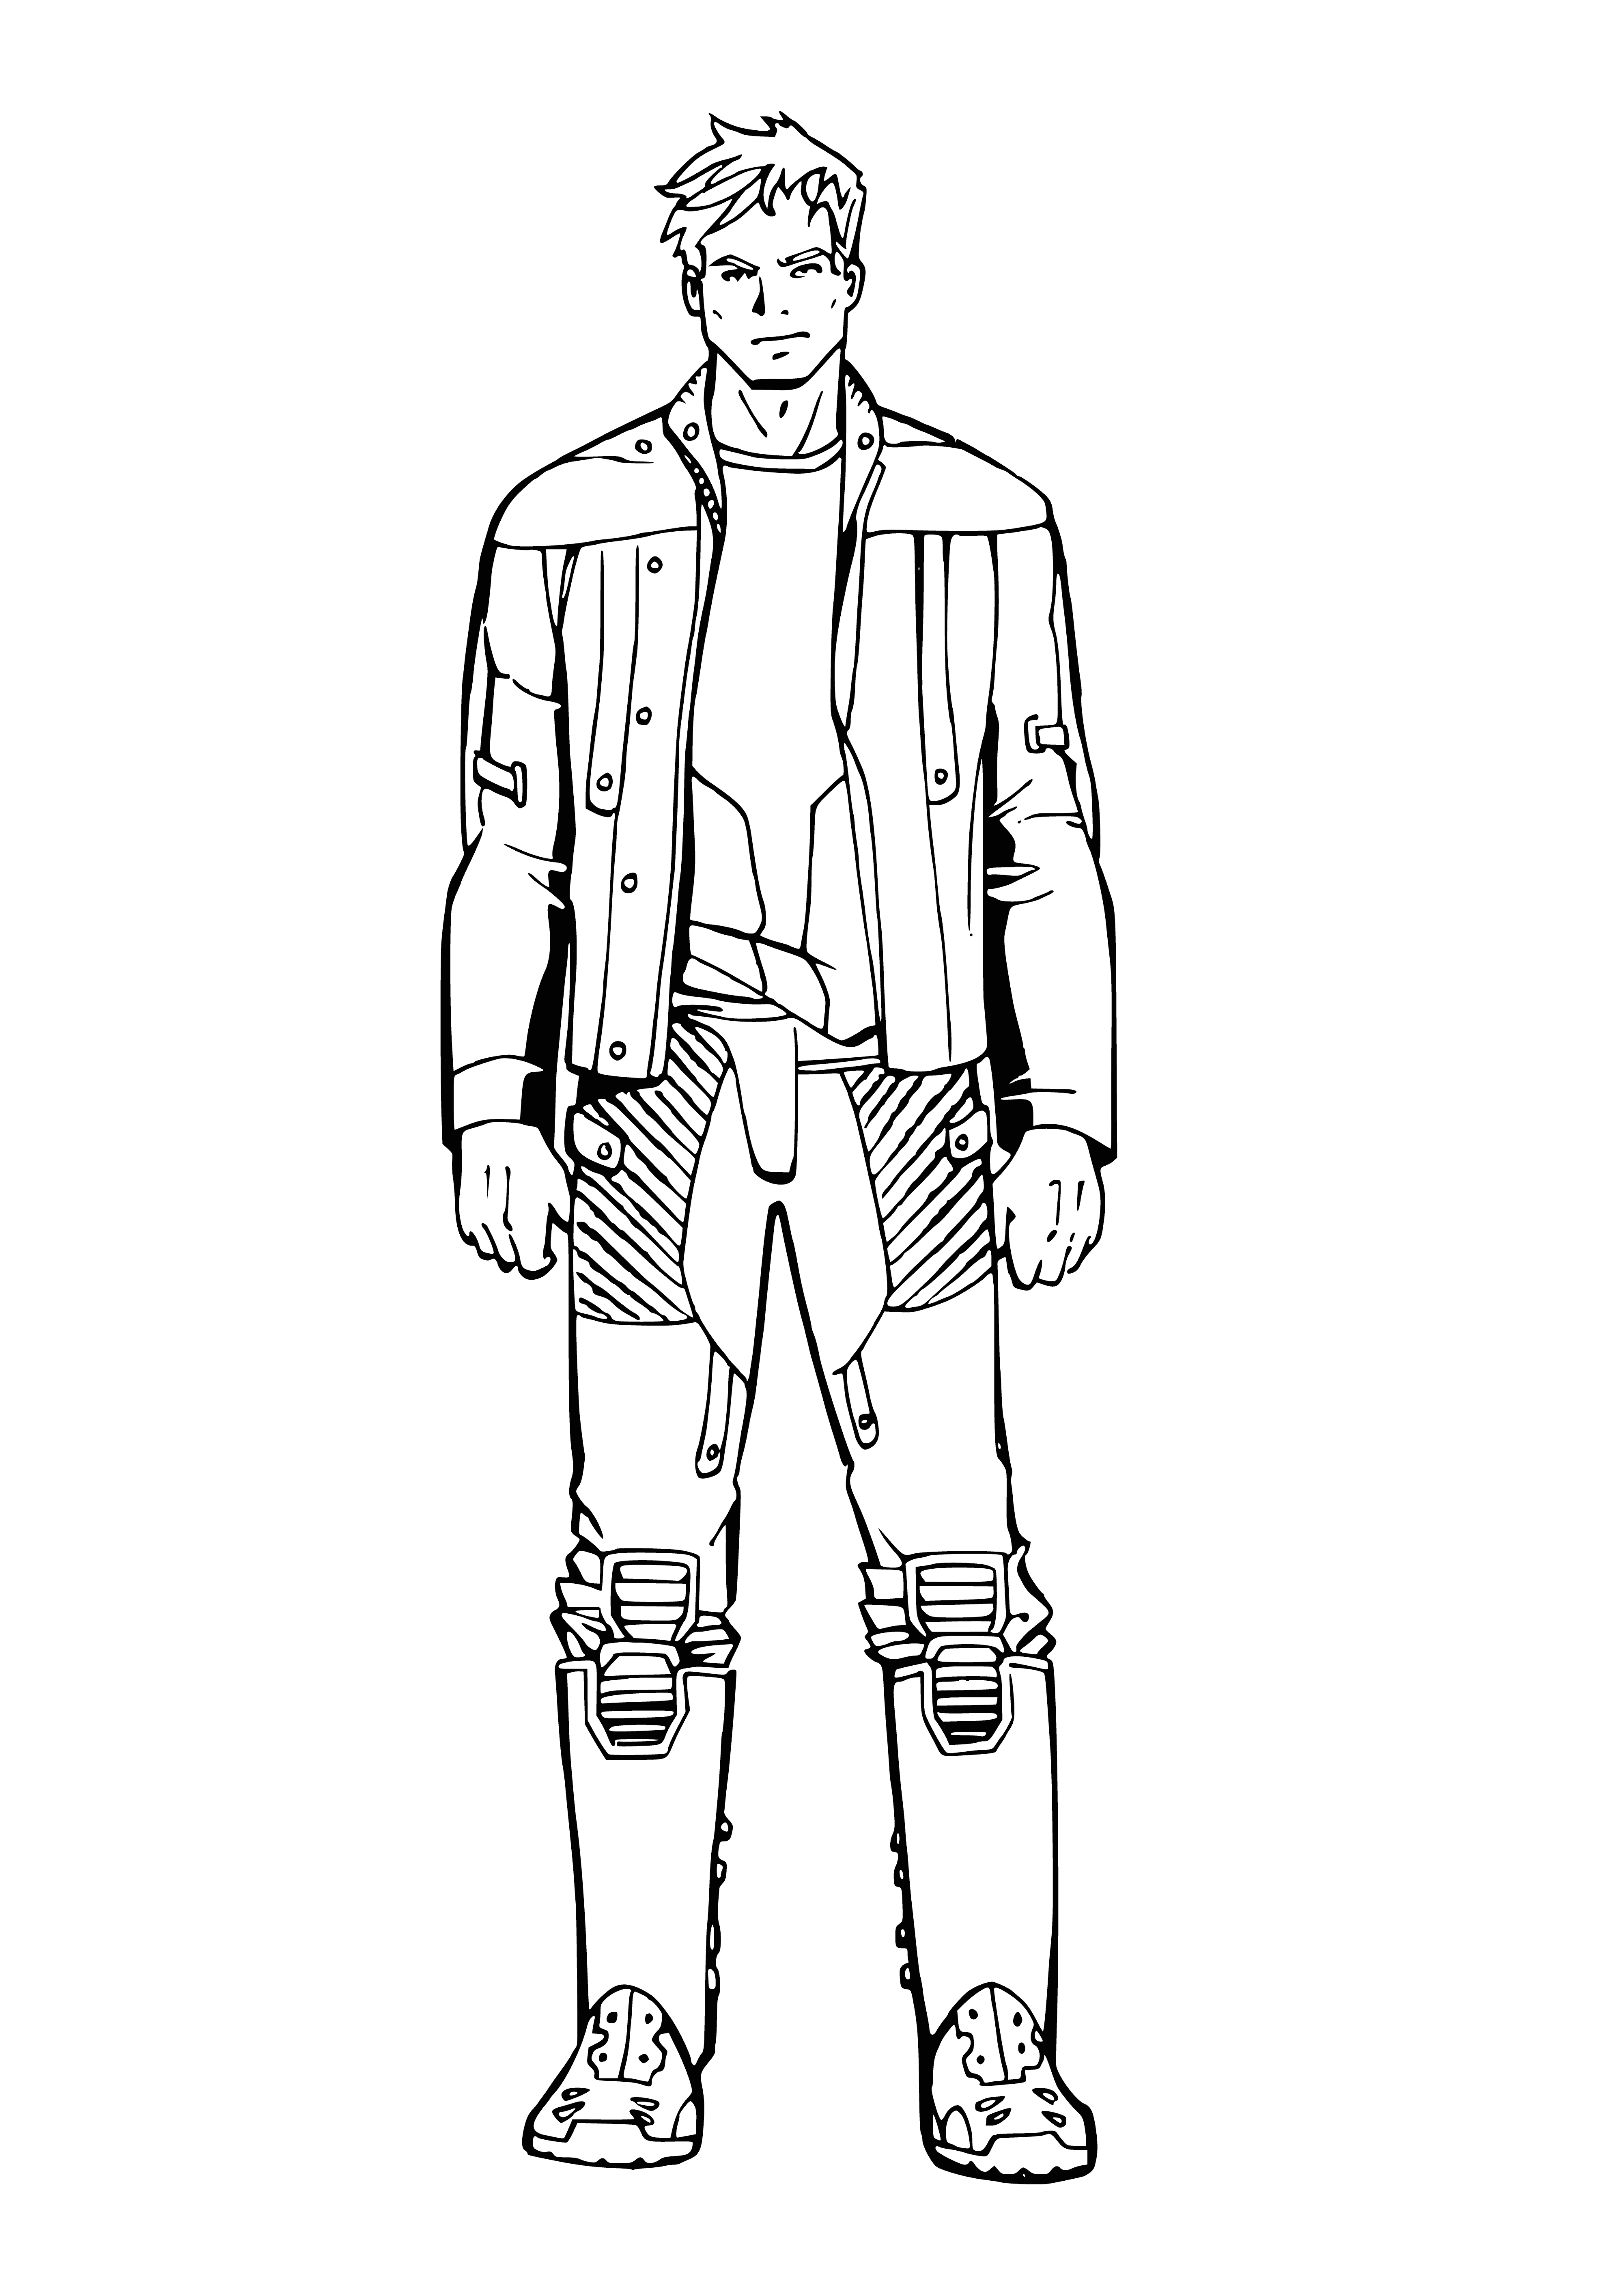 Peter Quill coloring page